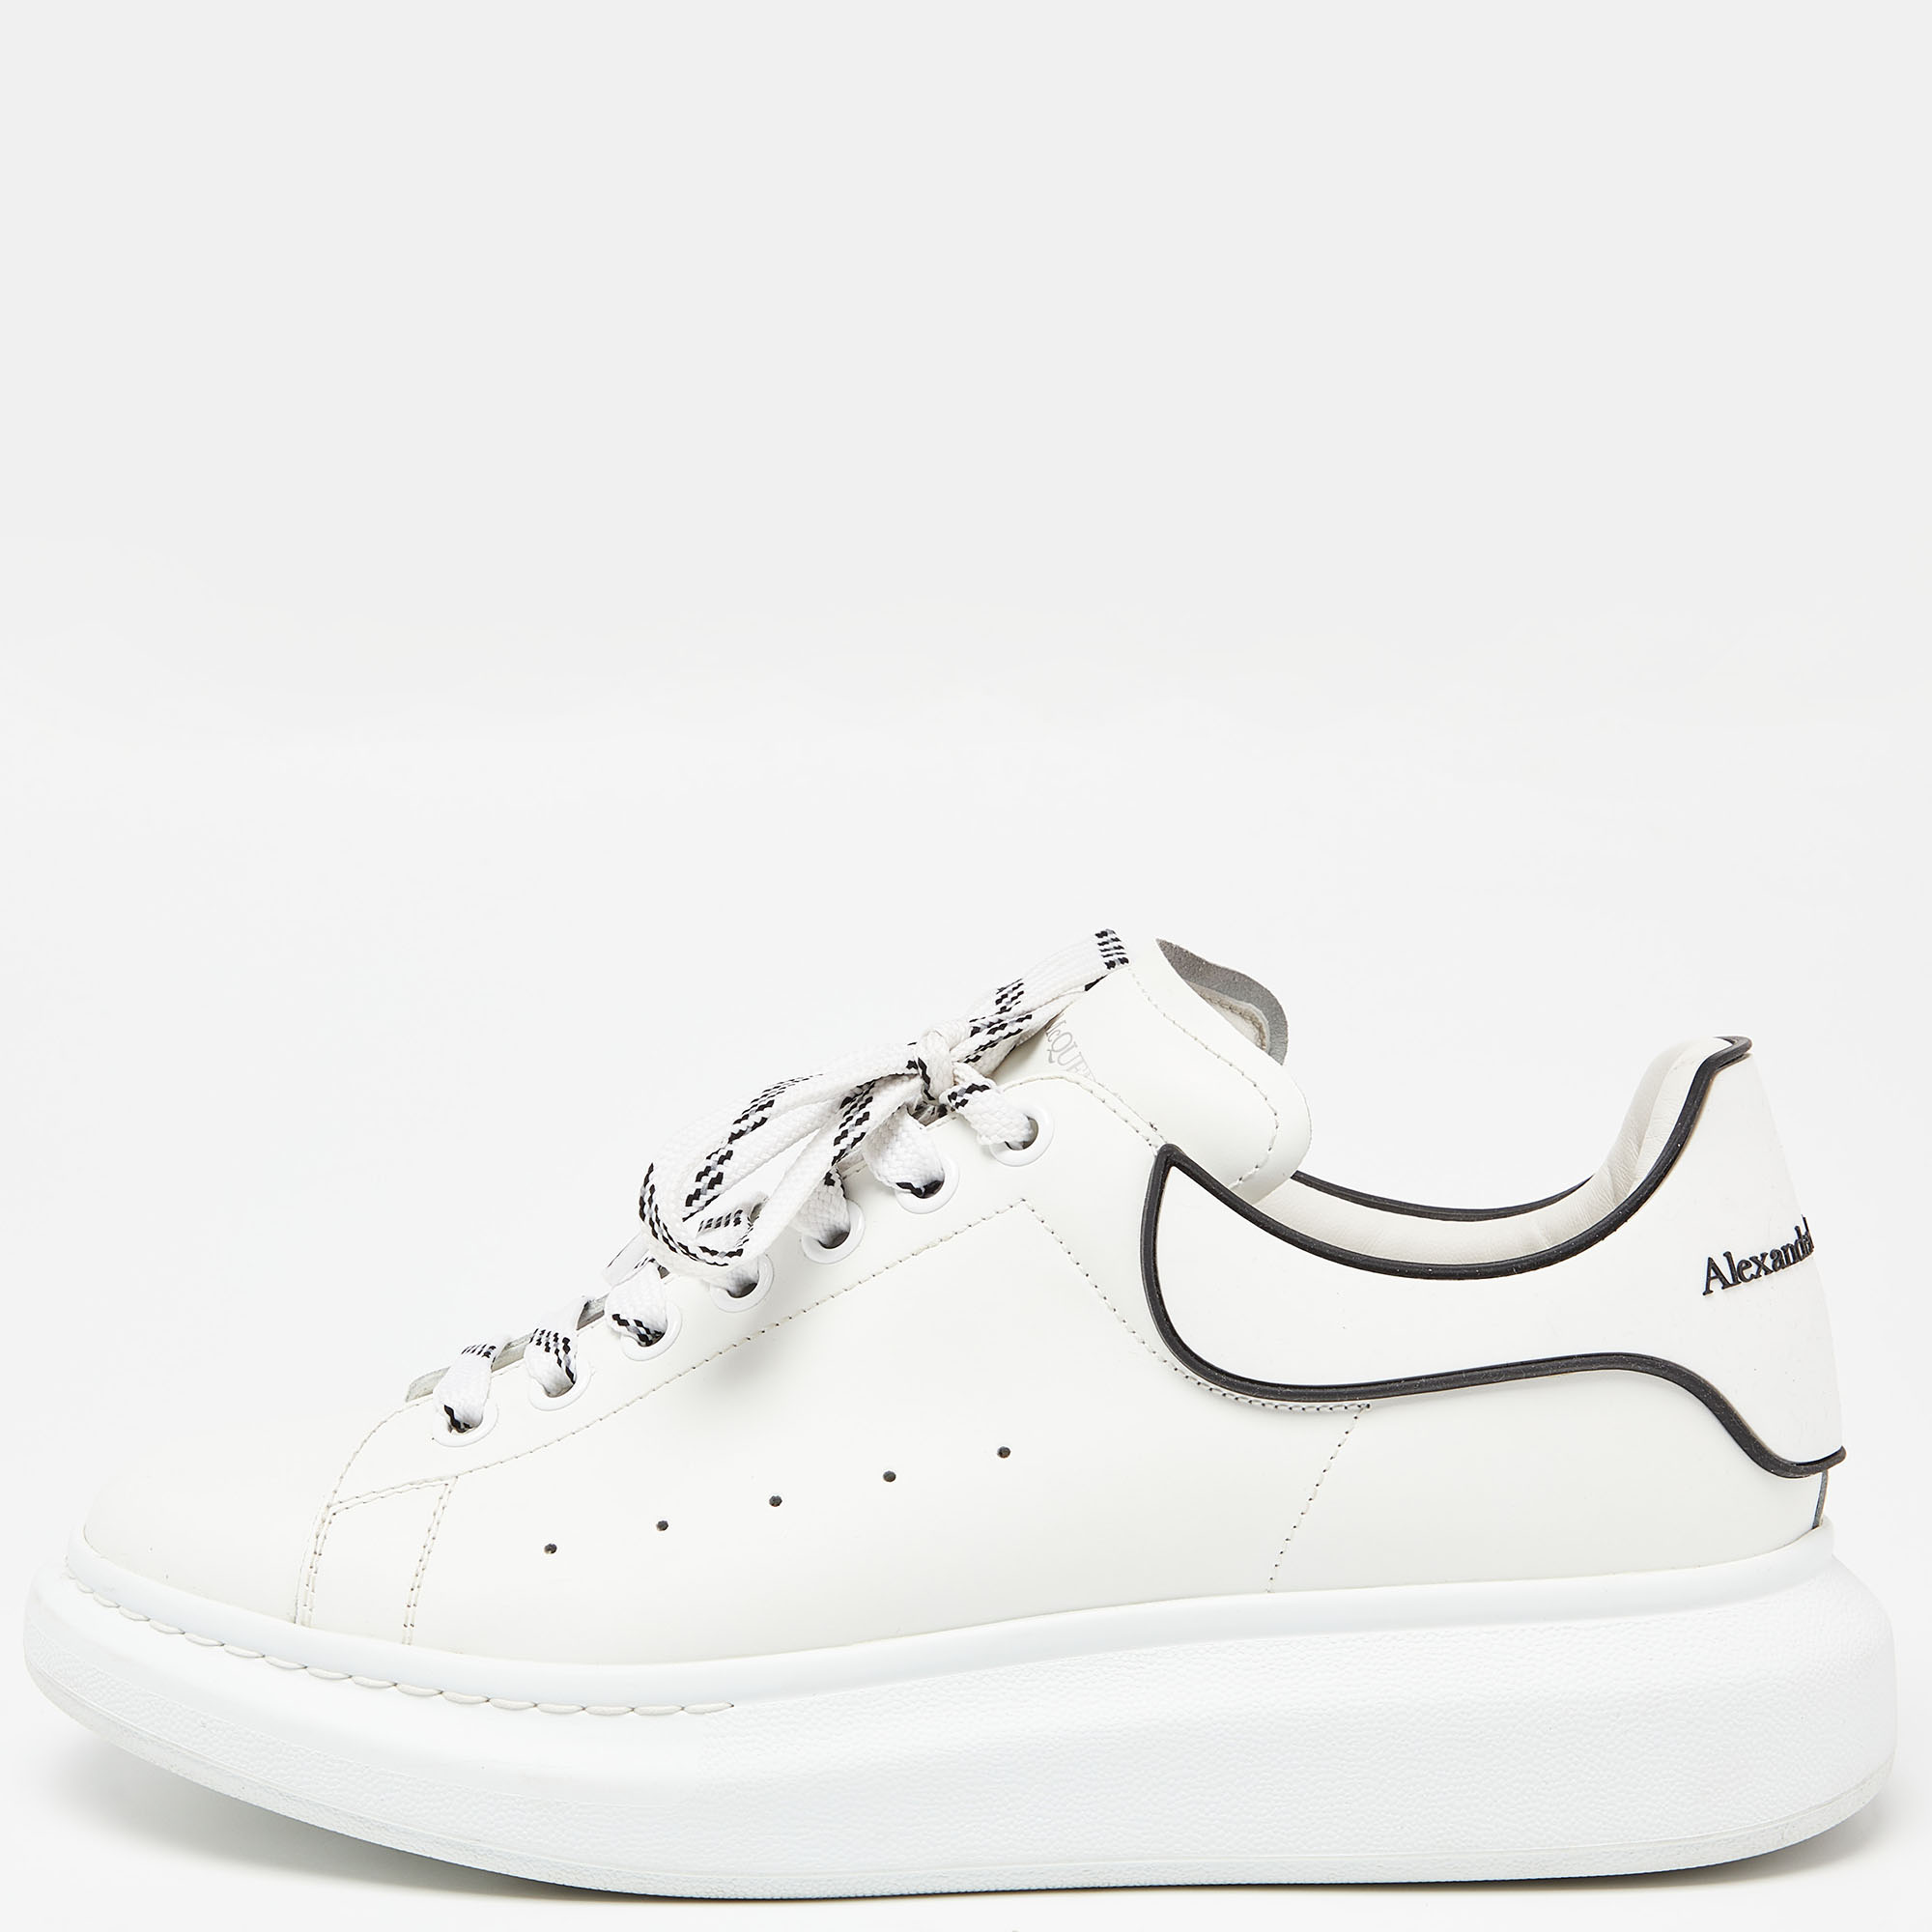 Alexander McQueen White/Black Leather Oversized Sneakers Size 44